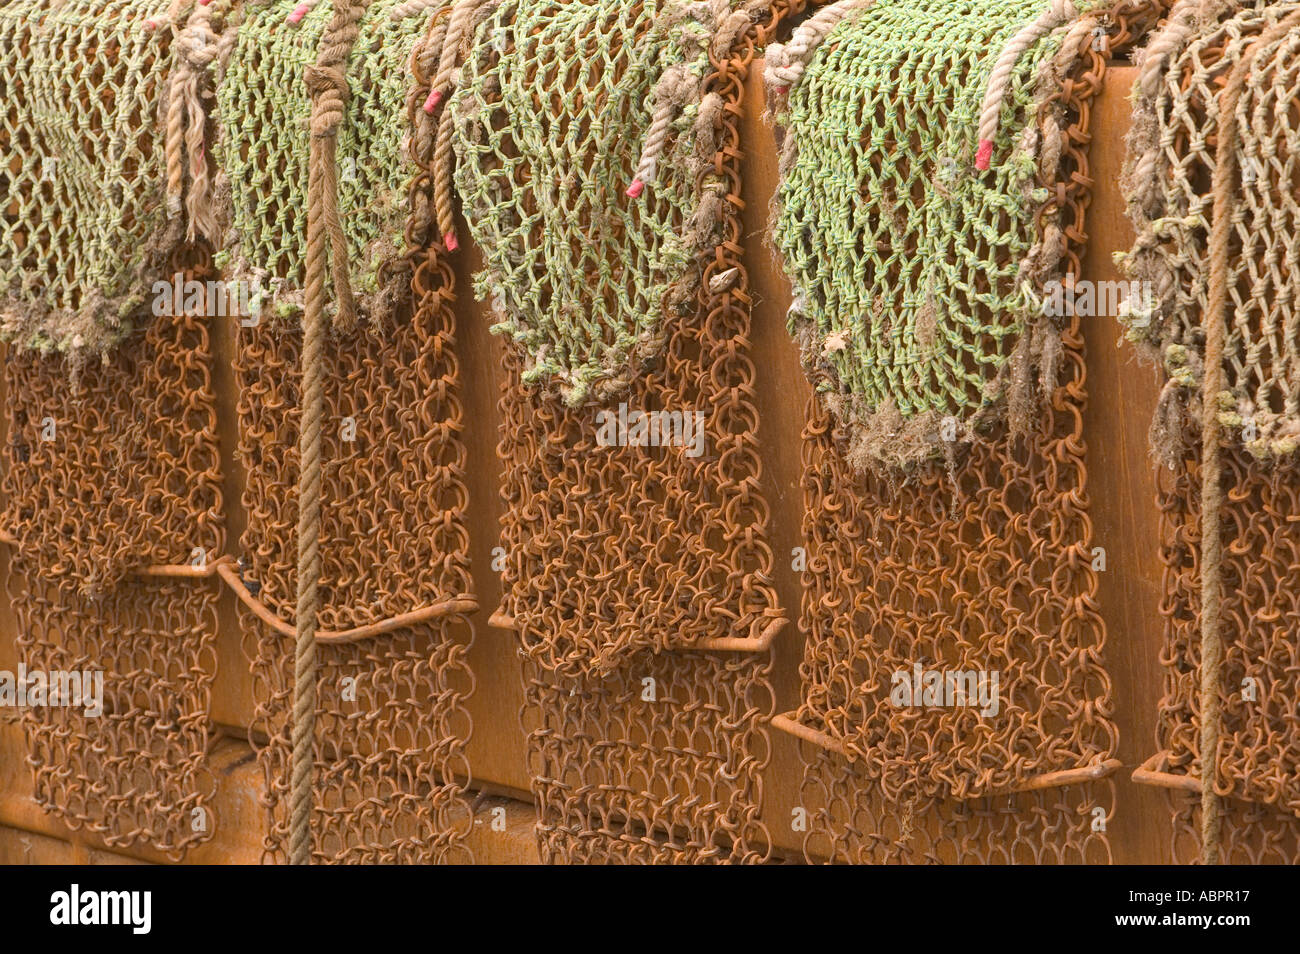 scallop dredging nets on the side of a trawler in Kirkudbright harbour Stock Photo